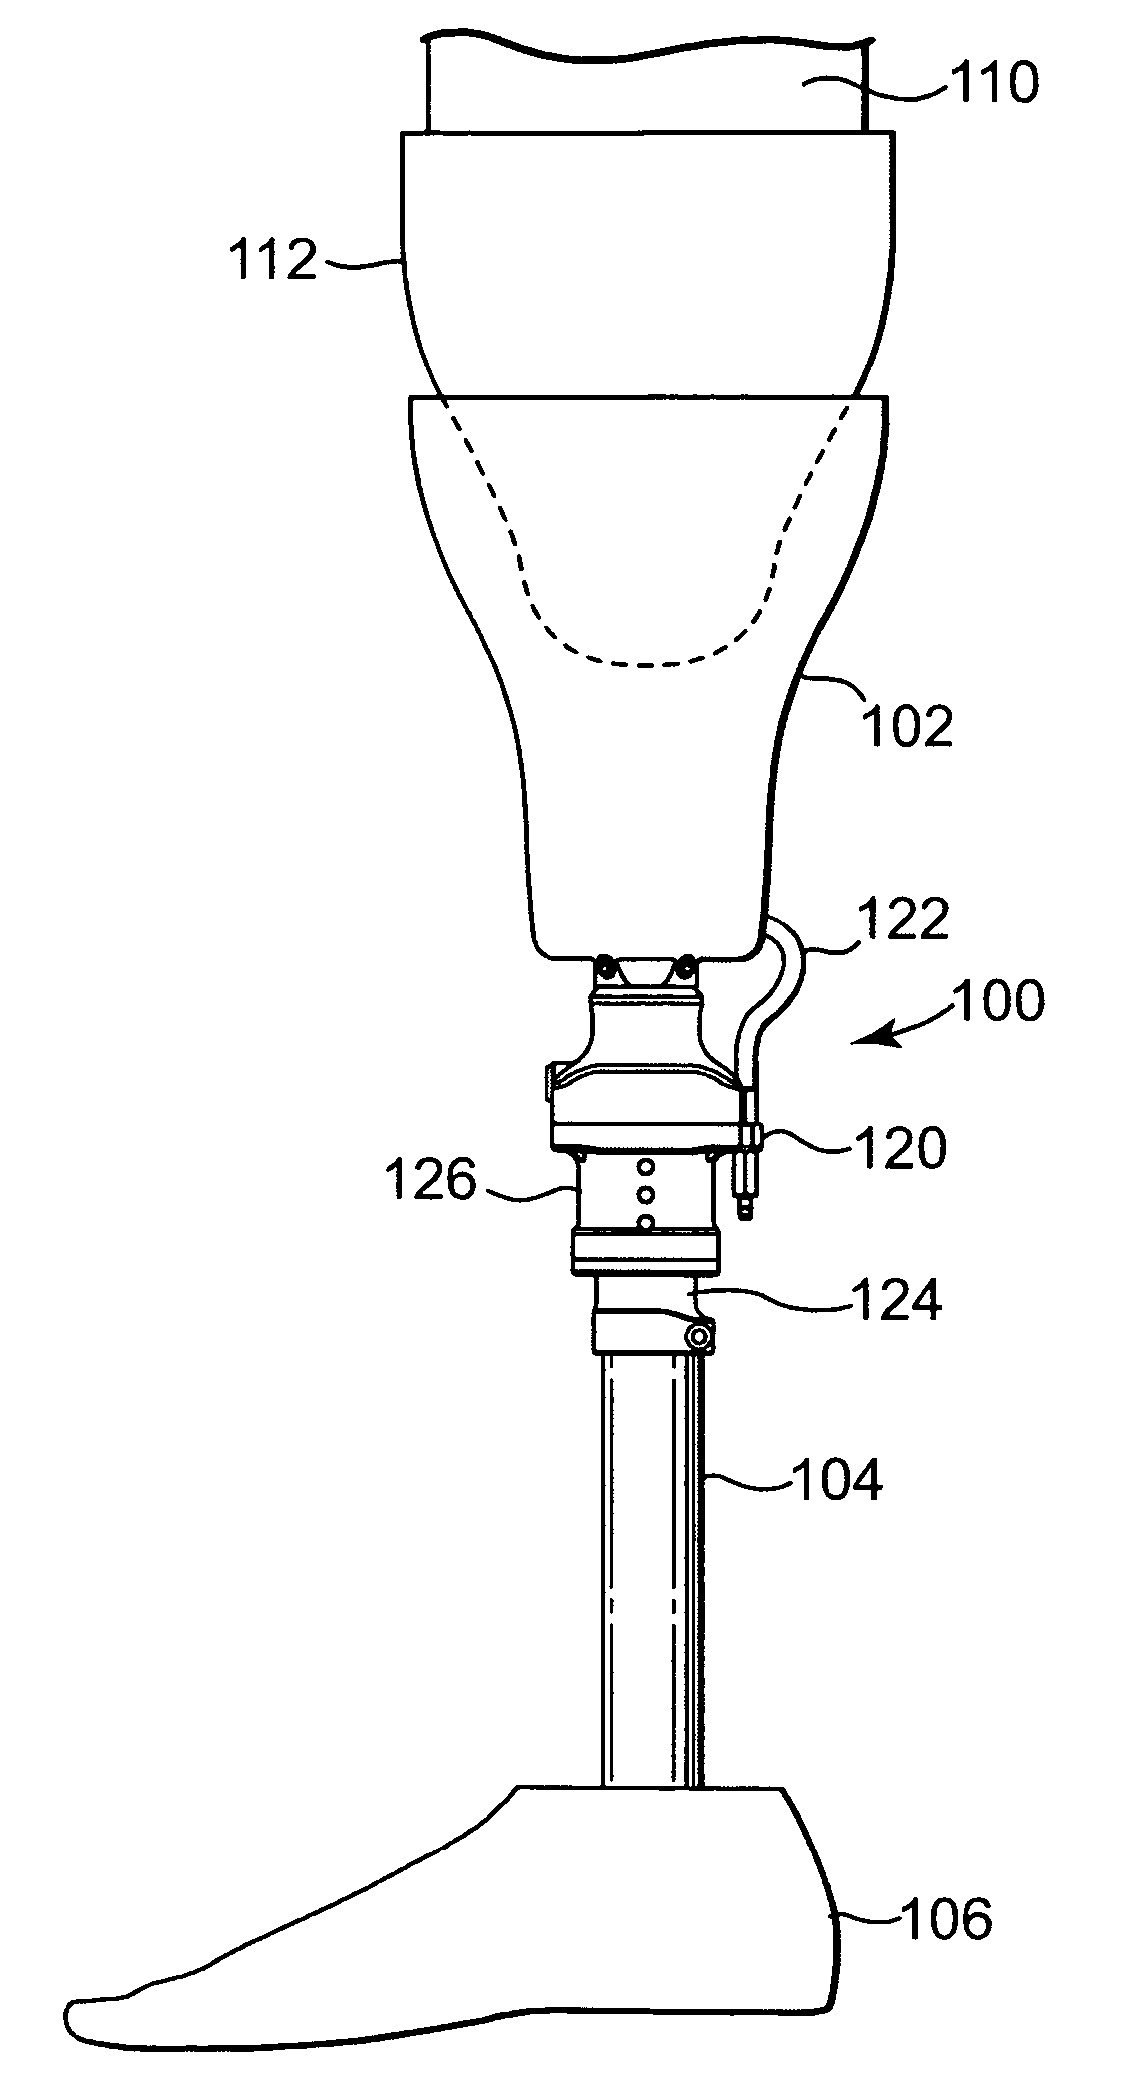 Vacuum pump with shock absorption and controlled rotation for prosthetic devices